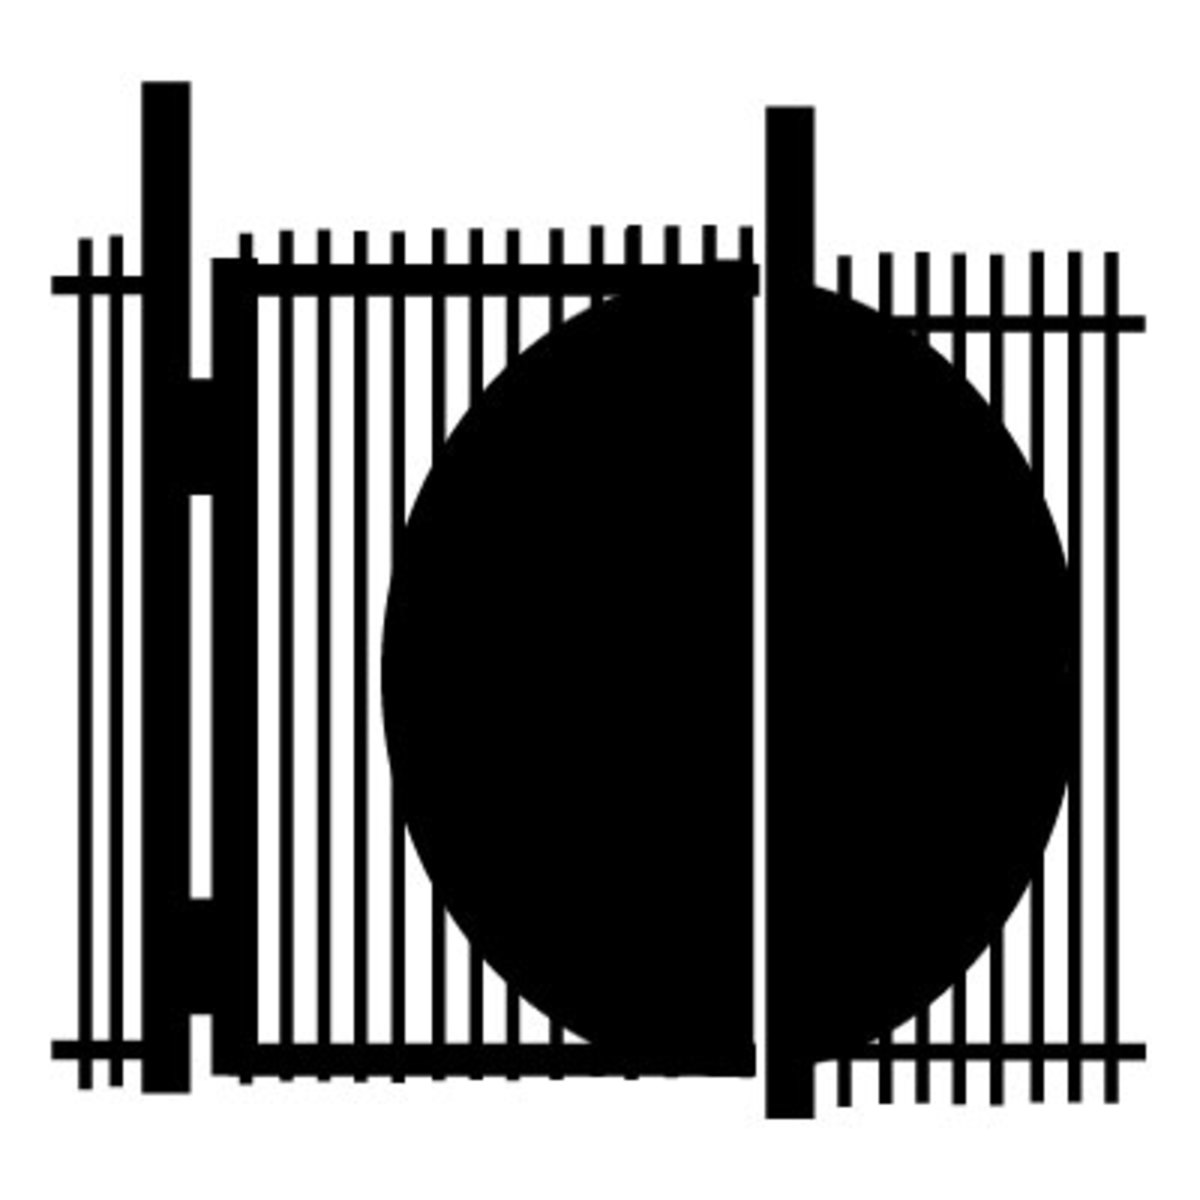 Metal gate with sheet metal applied to guard against reach-through unauthorized entry.  